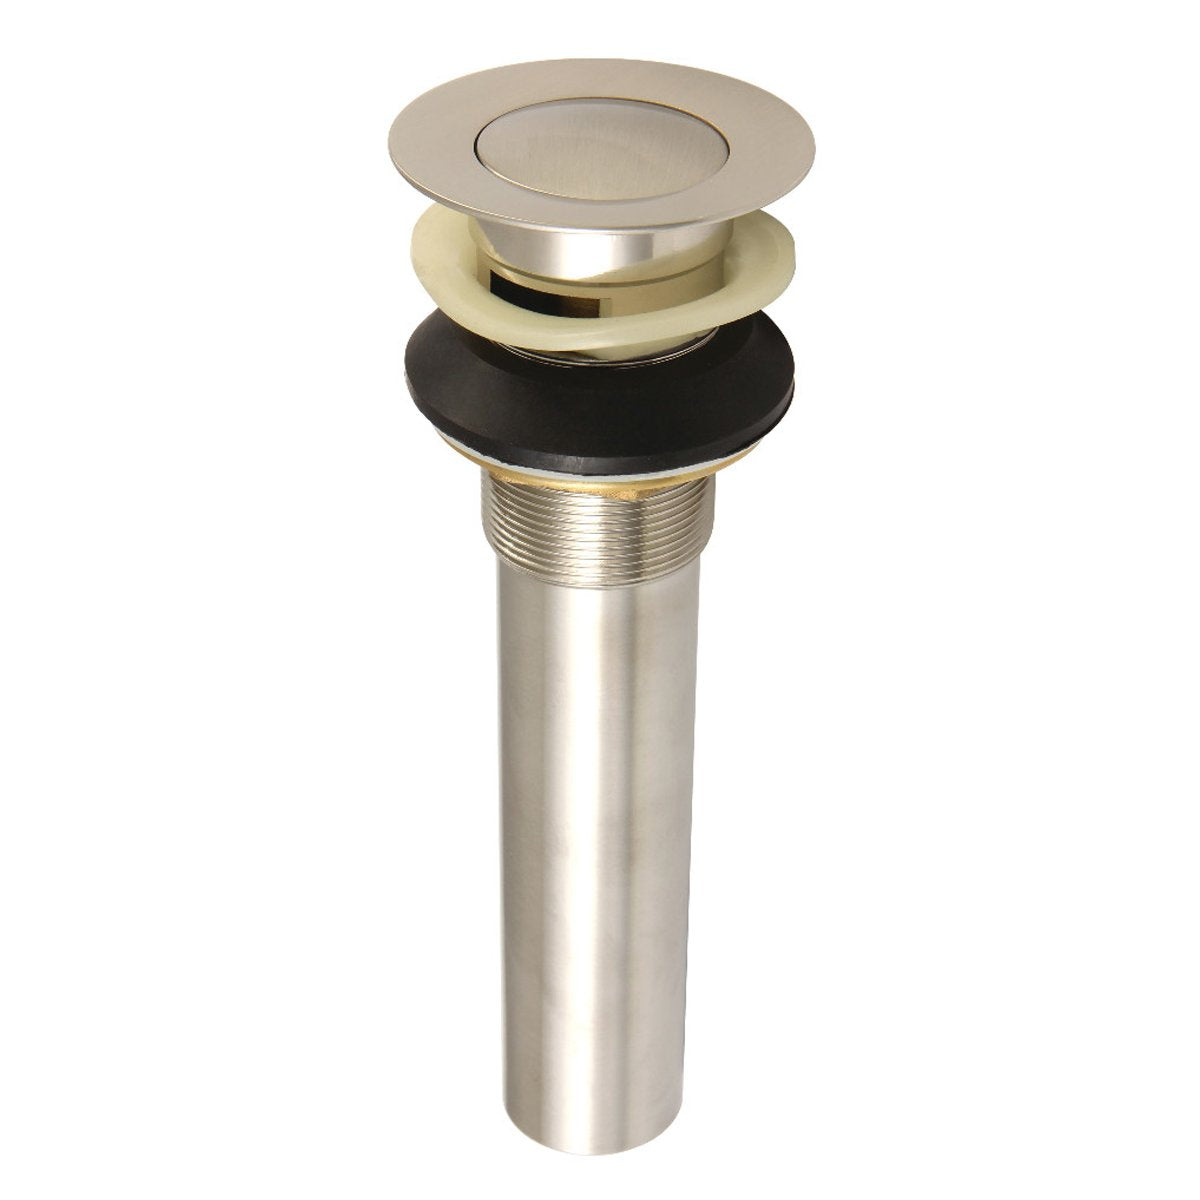 Kingston Brass Complement Push-Up Drain with Overflow